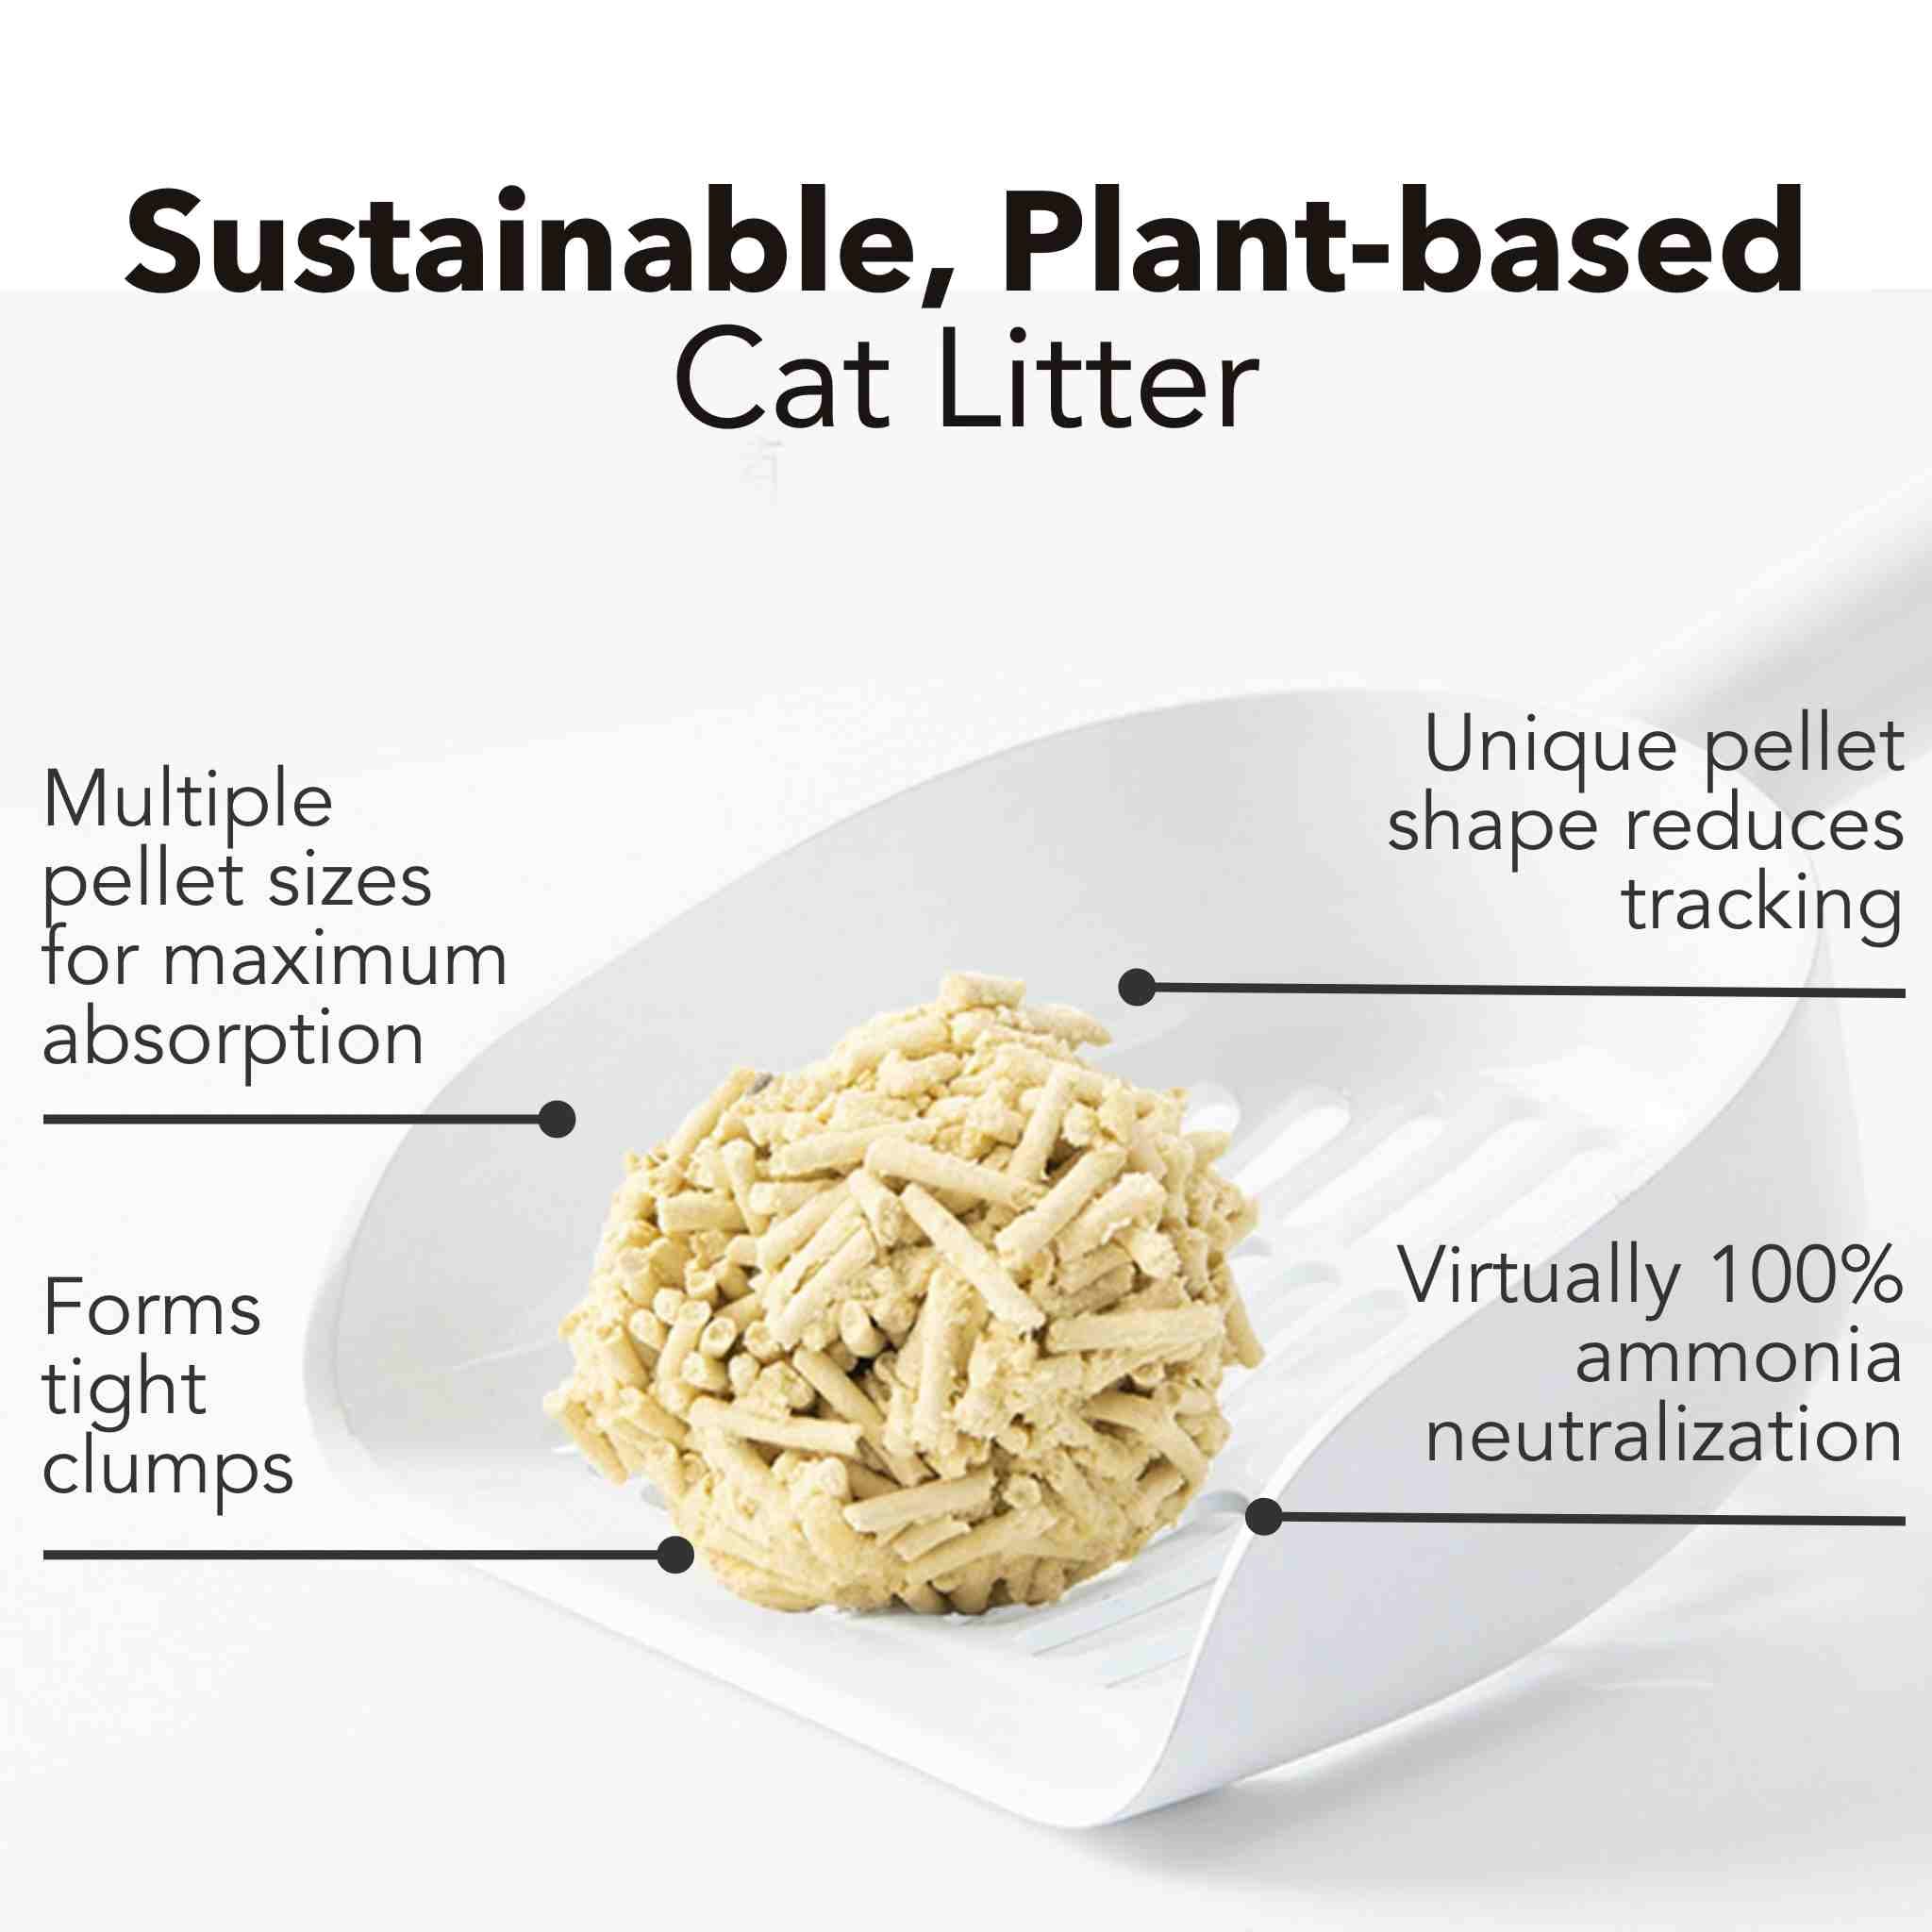 Scoop of sustainable, plant-based cat litter highlighting features like multiple pellet sizes for maximum absorption, unique shape to reduce tracking, tight clumping, and 99% ammonia neutralization.